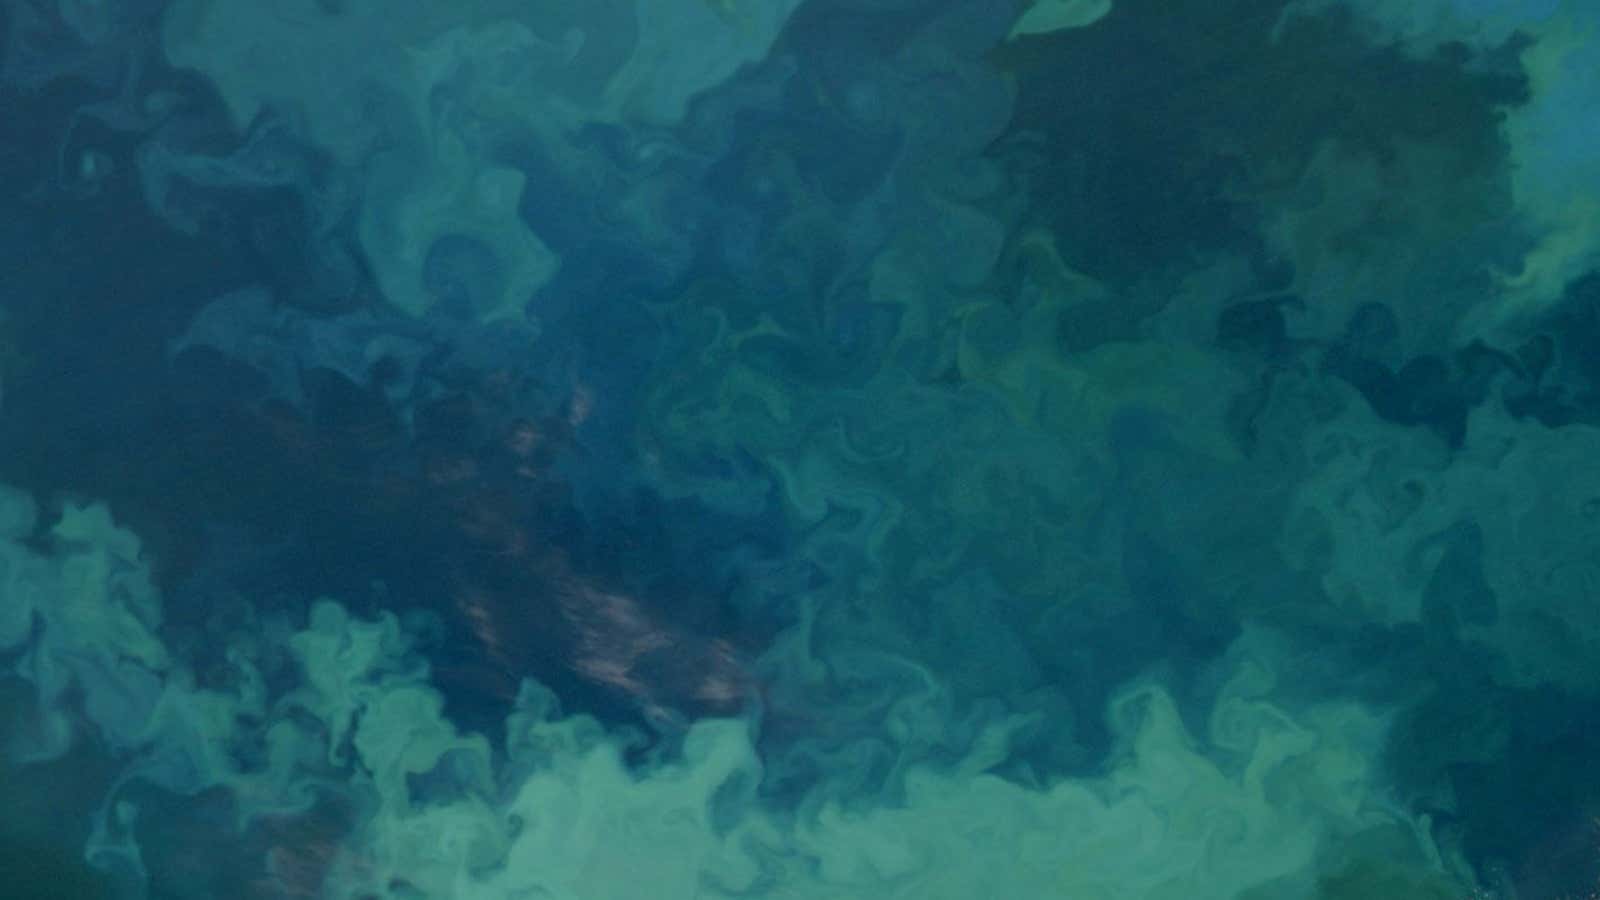 When tiny plant-like organisms float to the surface of the ocean, the result looks like a painting, on a global scale.